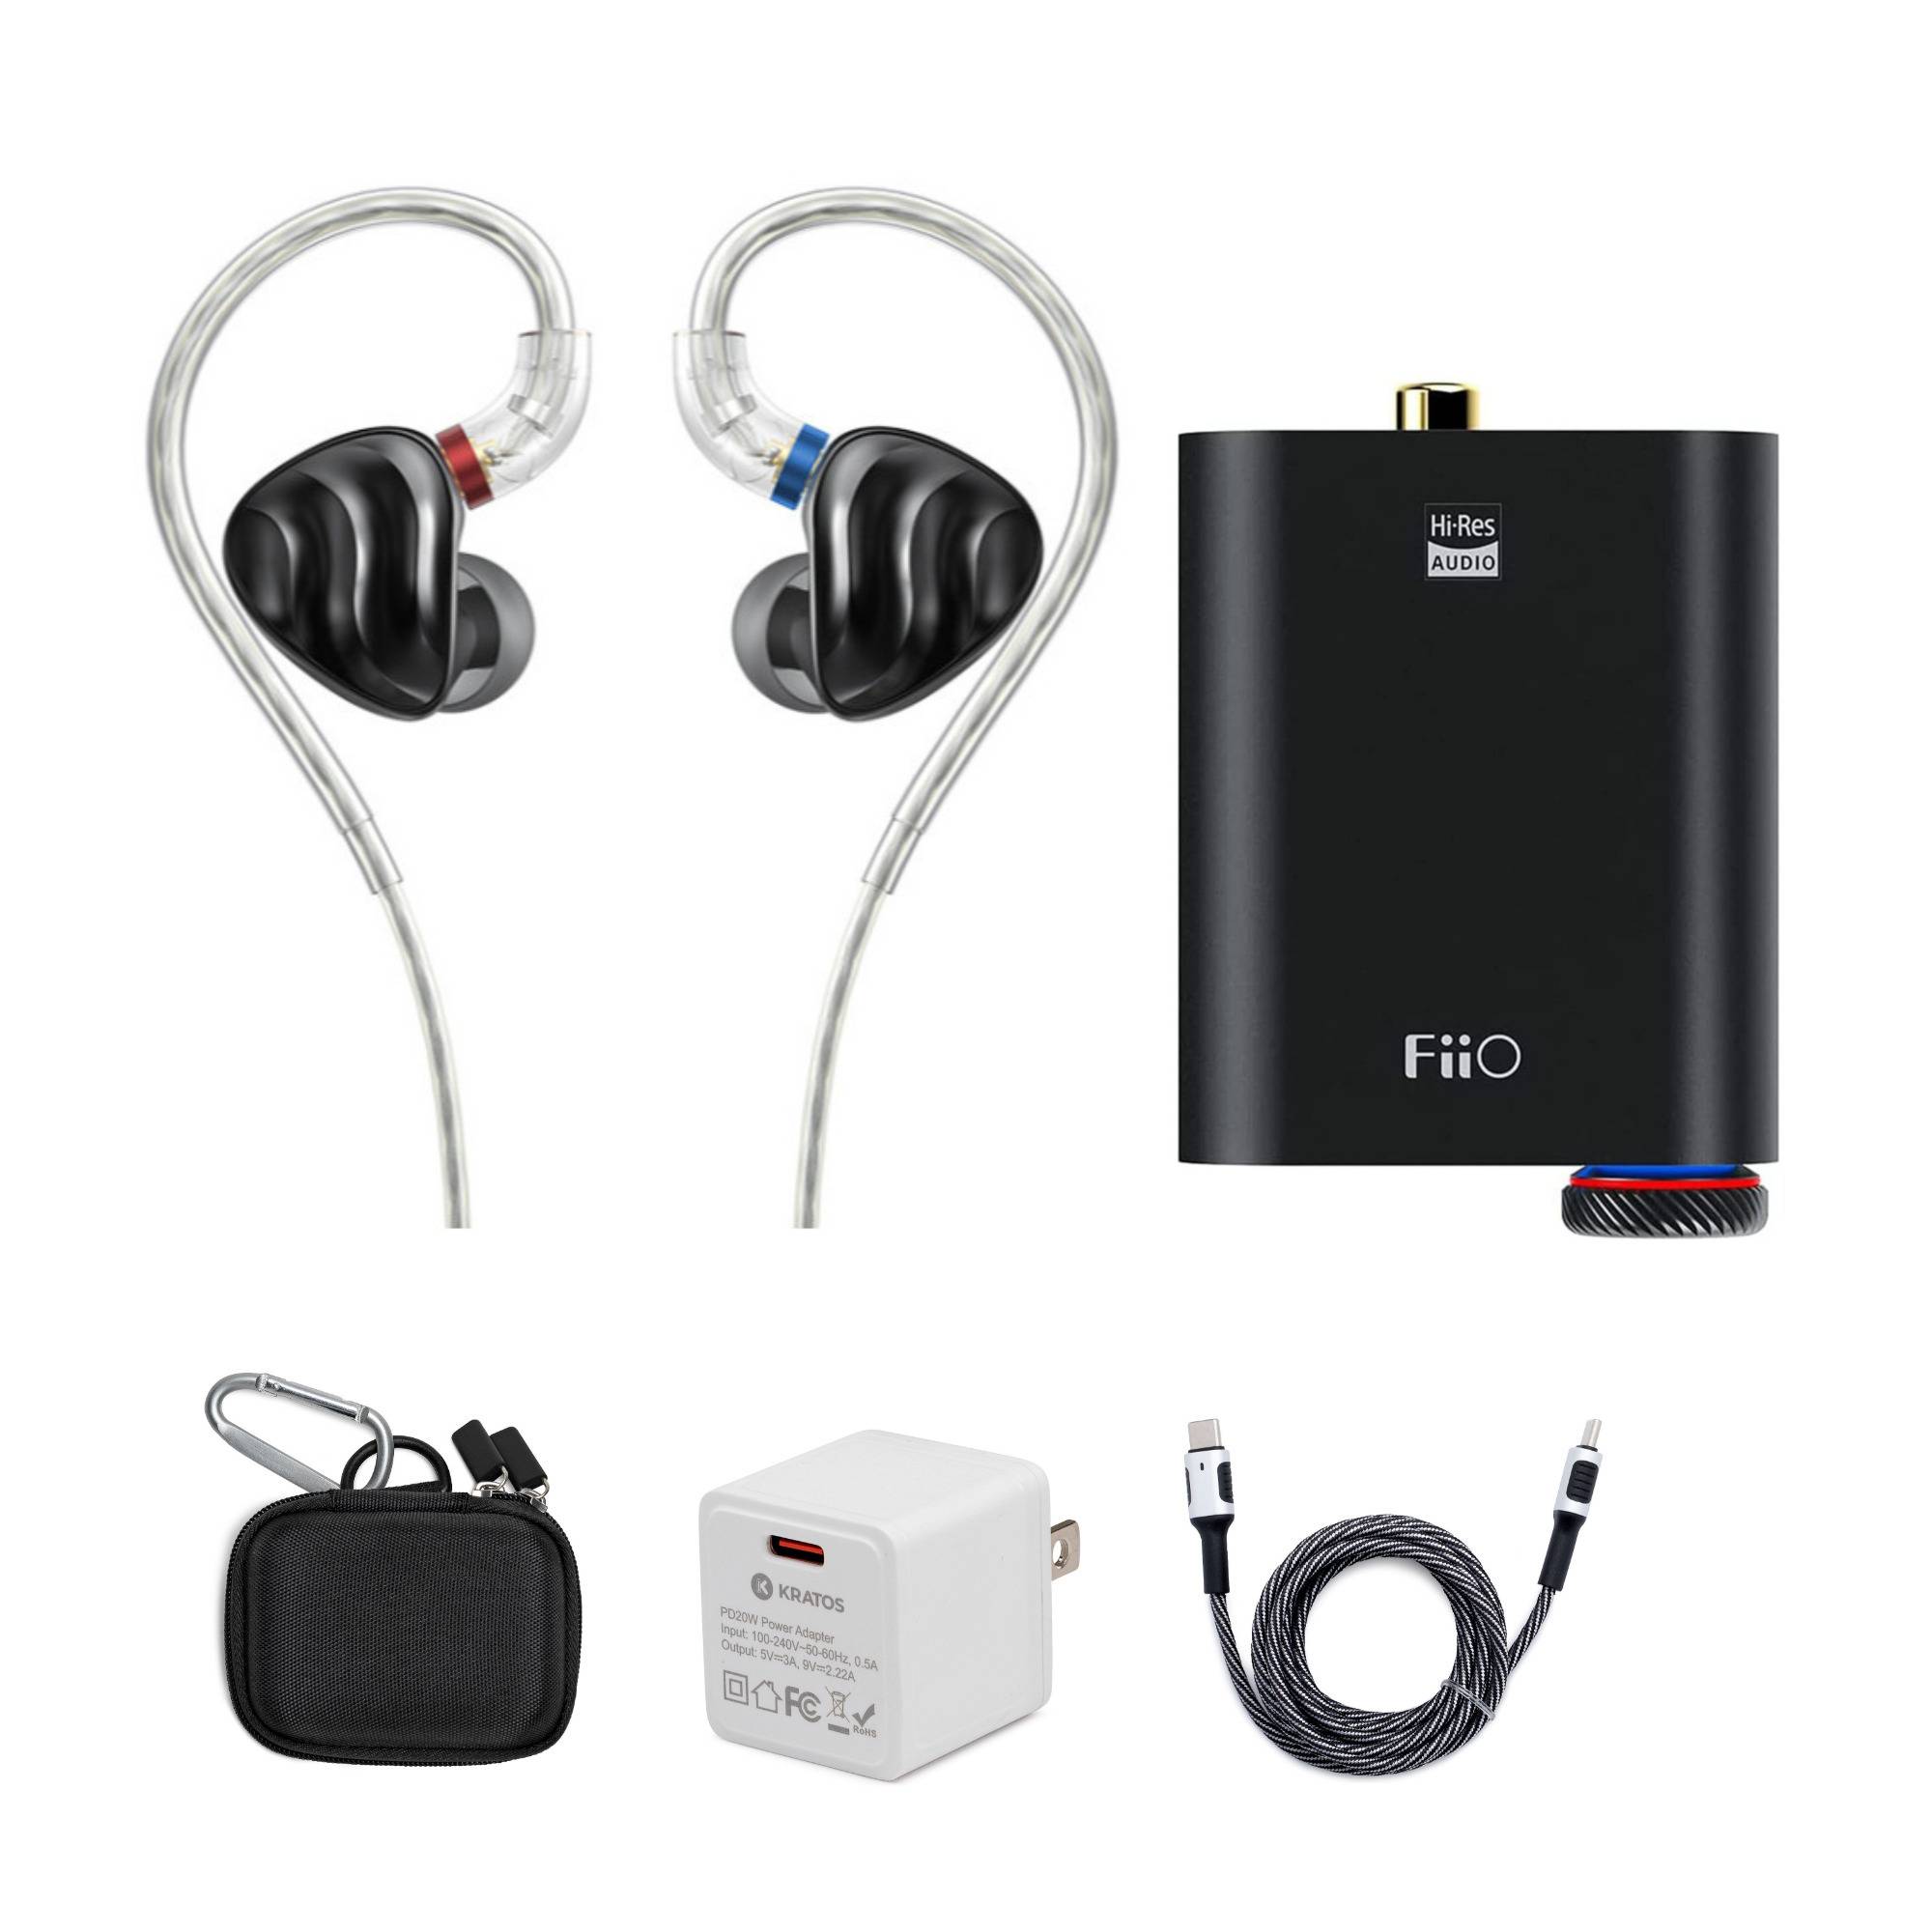 FiiO Dynamic Driver Hybrid Wired Earphones with Headphone Amplifier, Power Adapter and Cable Bundle